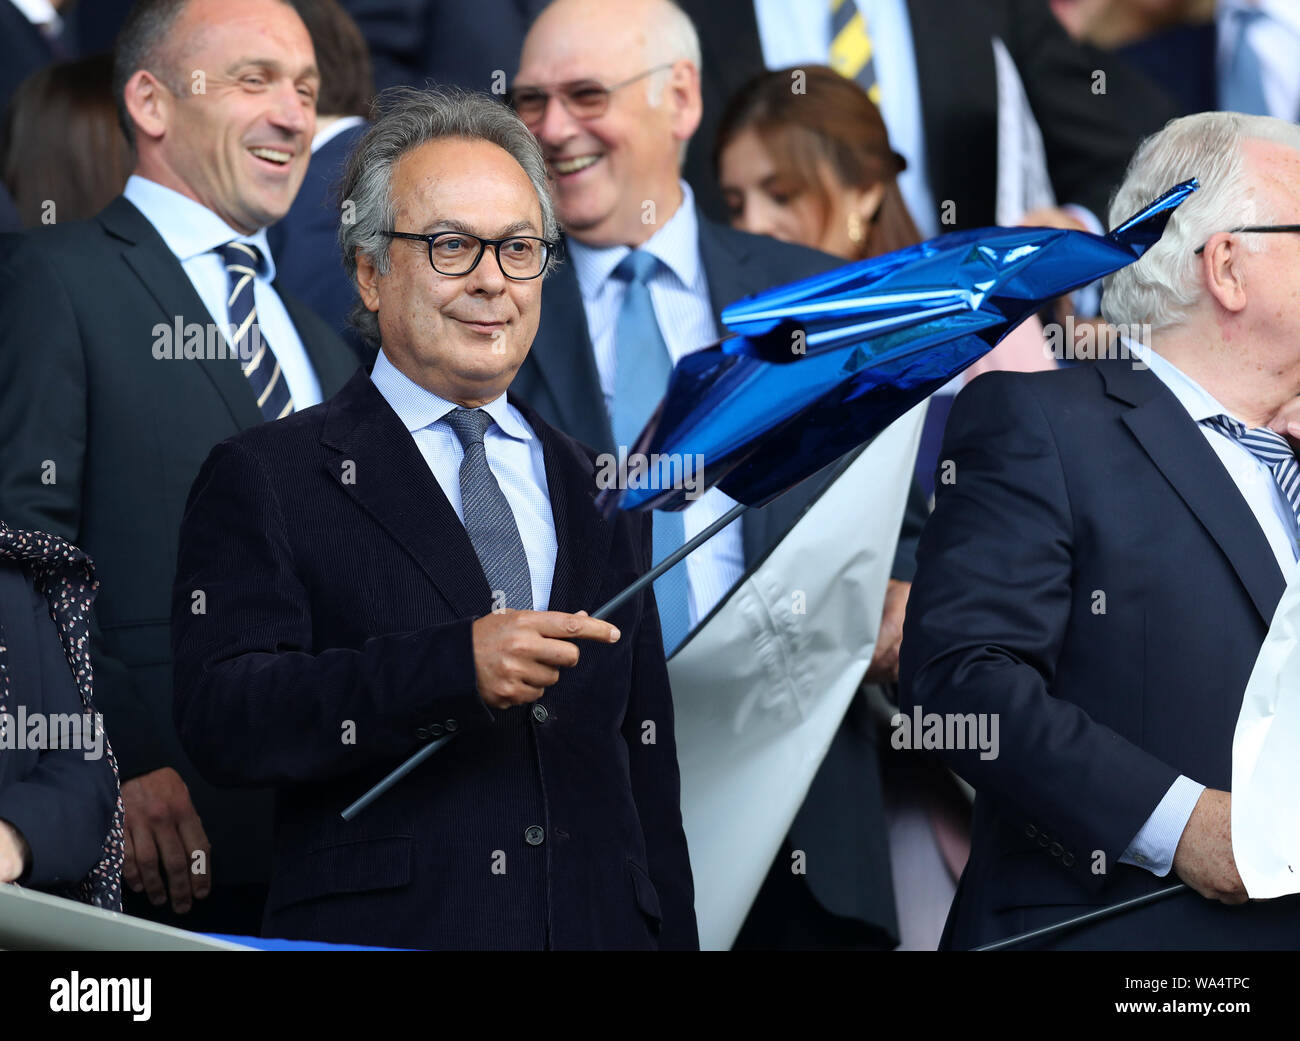 Liverpool, Lancashire, UK. 17th Aug, 2019. Premier League Football, Everton versus Watford; Everton owner Farhad Moshiri waves a blue flag in the director's box before the kick off - Strictly Editorial Use Only. No use with unauthorized audio, video, data, fixture lists, club/league logos or 'live' services. Online in-match use limited to 120 images, no video emulation. No use in betting, games or single club/league/player publications Credit: Action Plus Sports Images/Alamy Live News Stock Photo